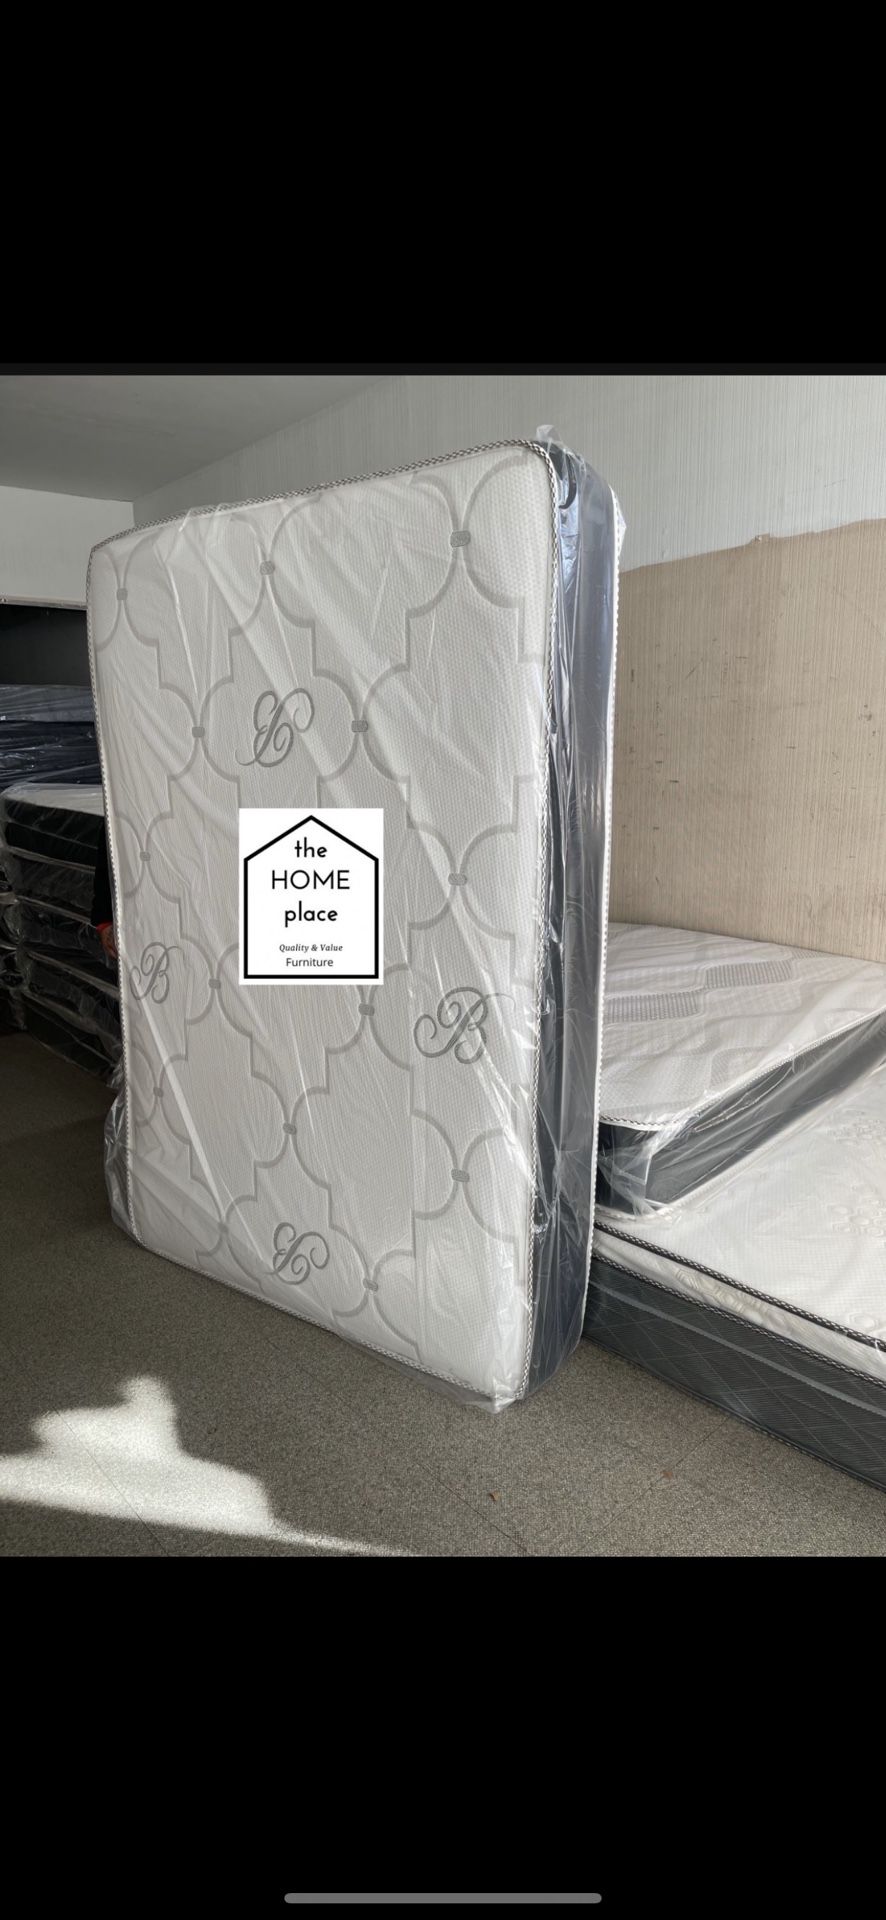 Top Quality Mattress Sale 🚨 Starting At Only $99 🚨 We Deliver 🚛